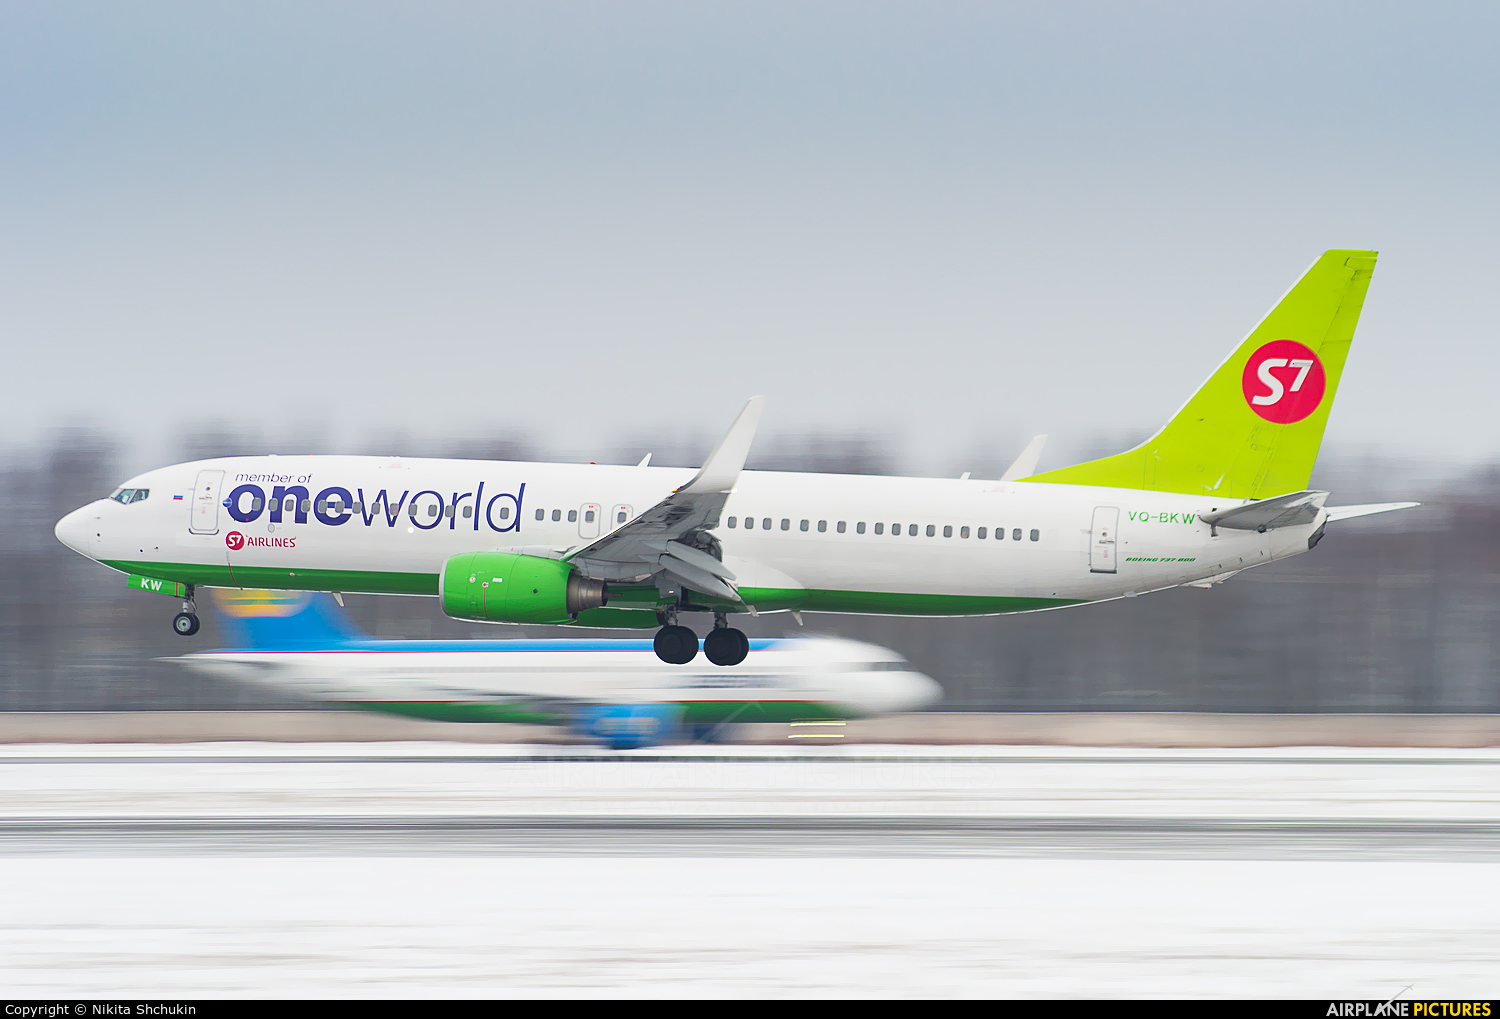 S7 Airlines VQ-BKW aircraft at St. Petersburg - Pulkovo